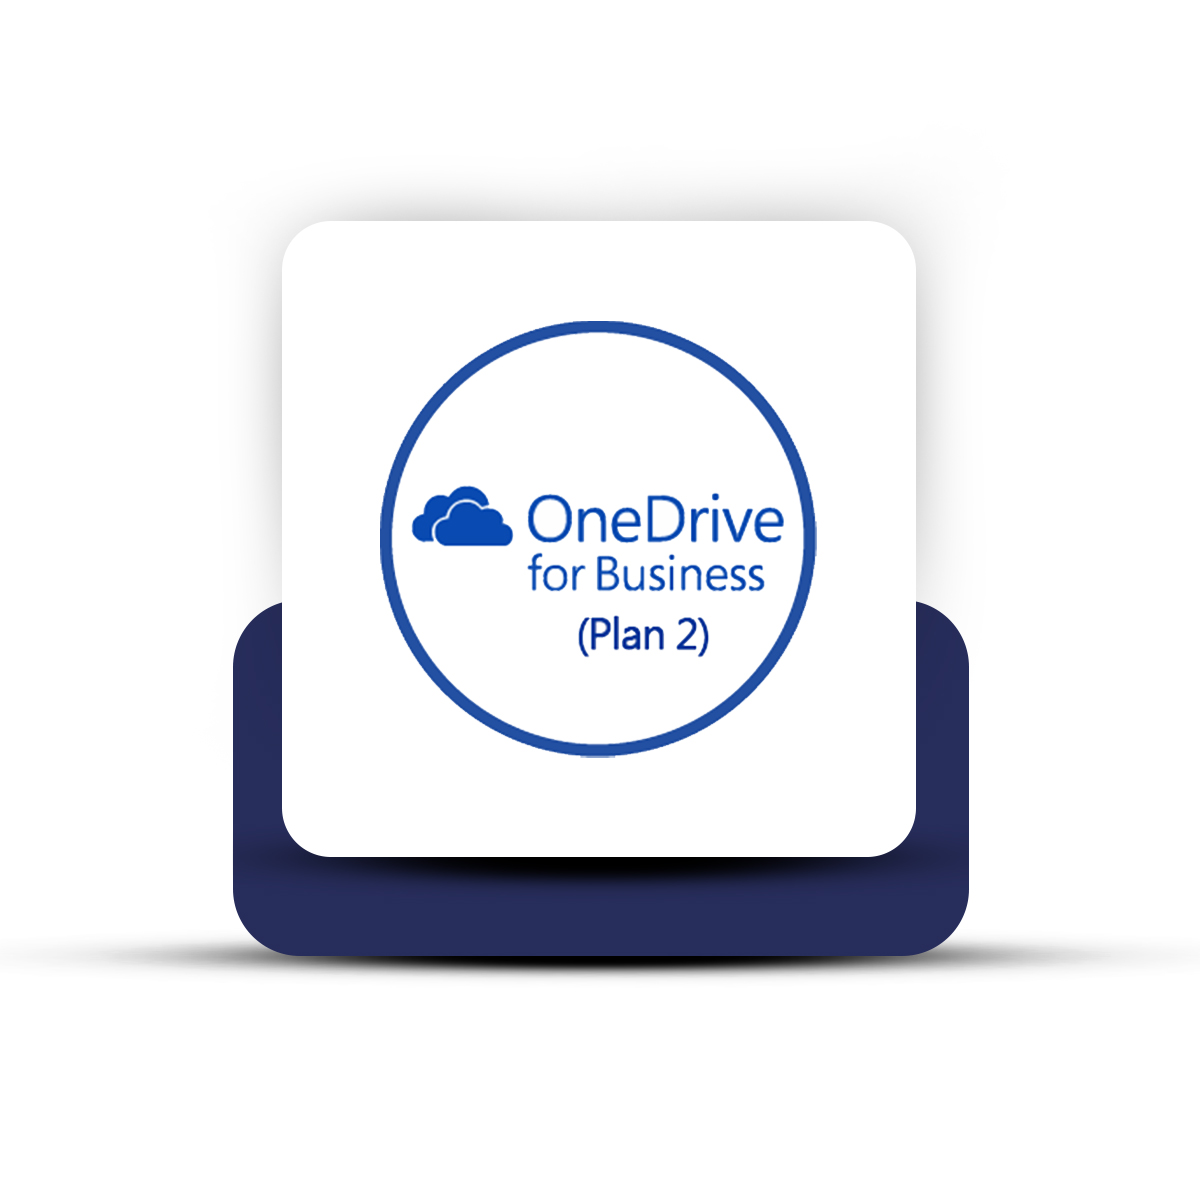 onedrive for business plan 2 features